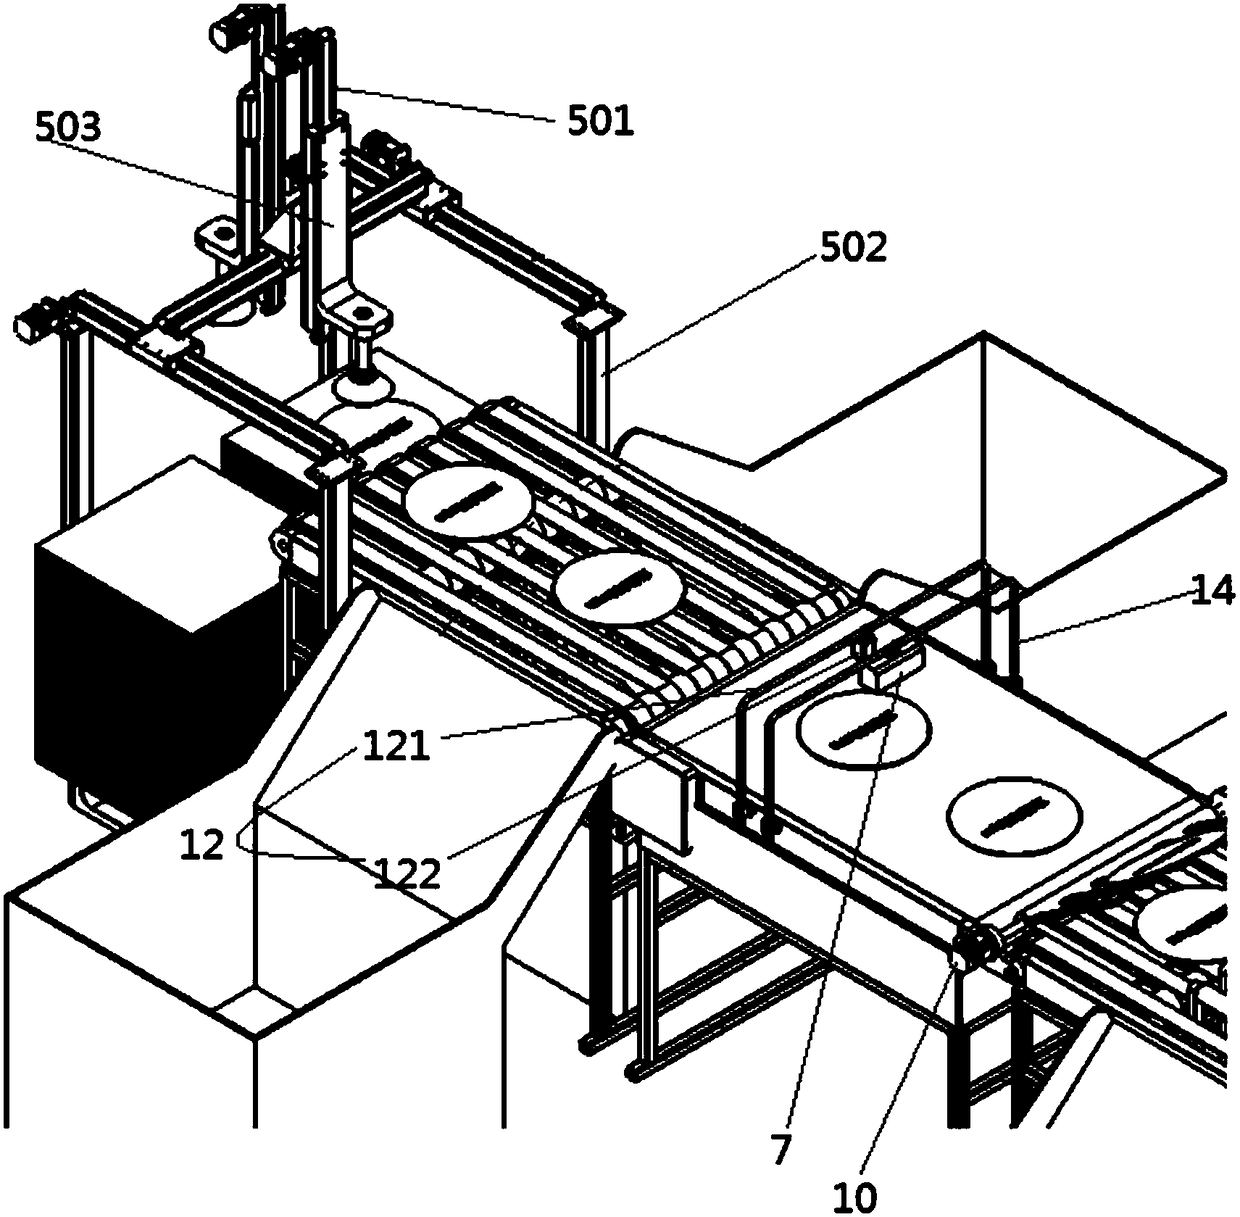 A device for fully automatic loading and unloading and visual inspection